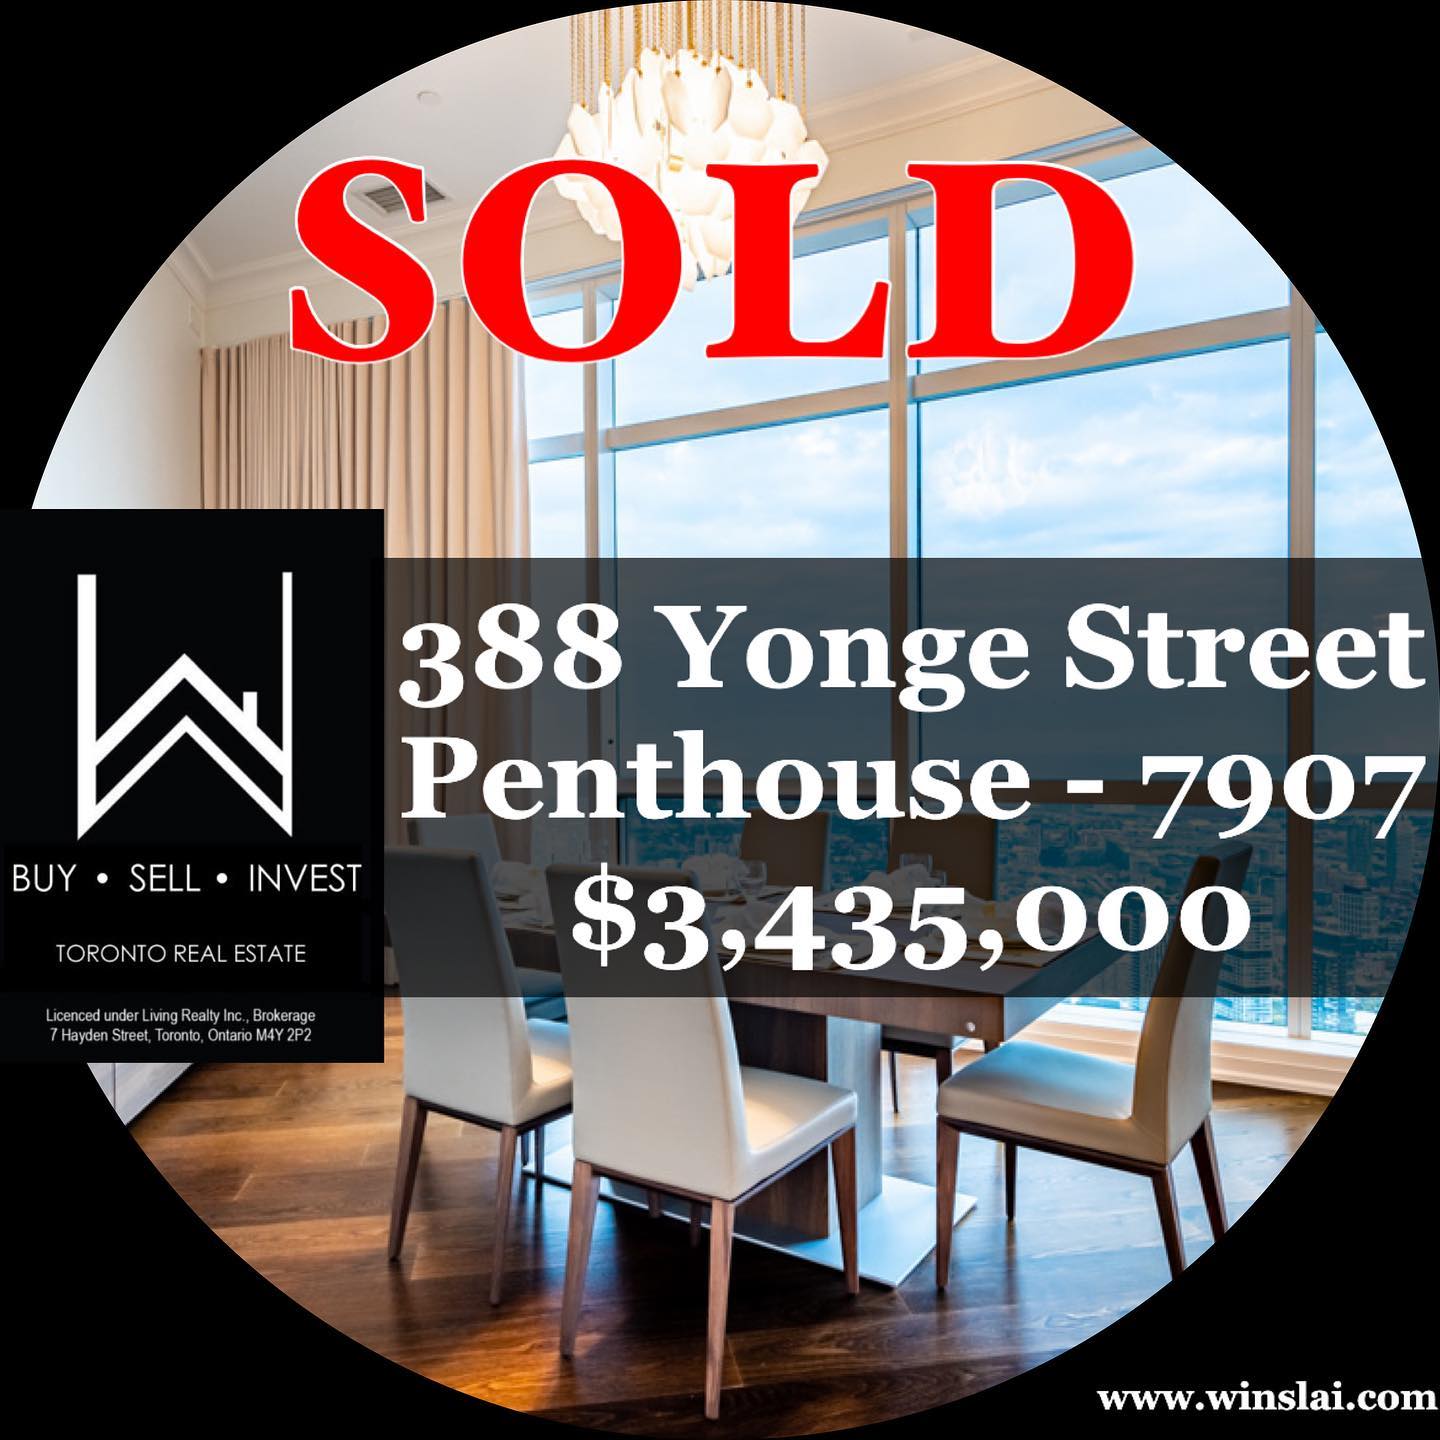 Sold flyer for 388 Yonge St, a Toronto Penthouse.